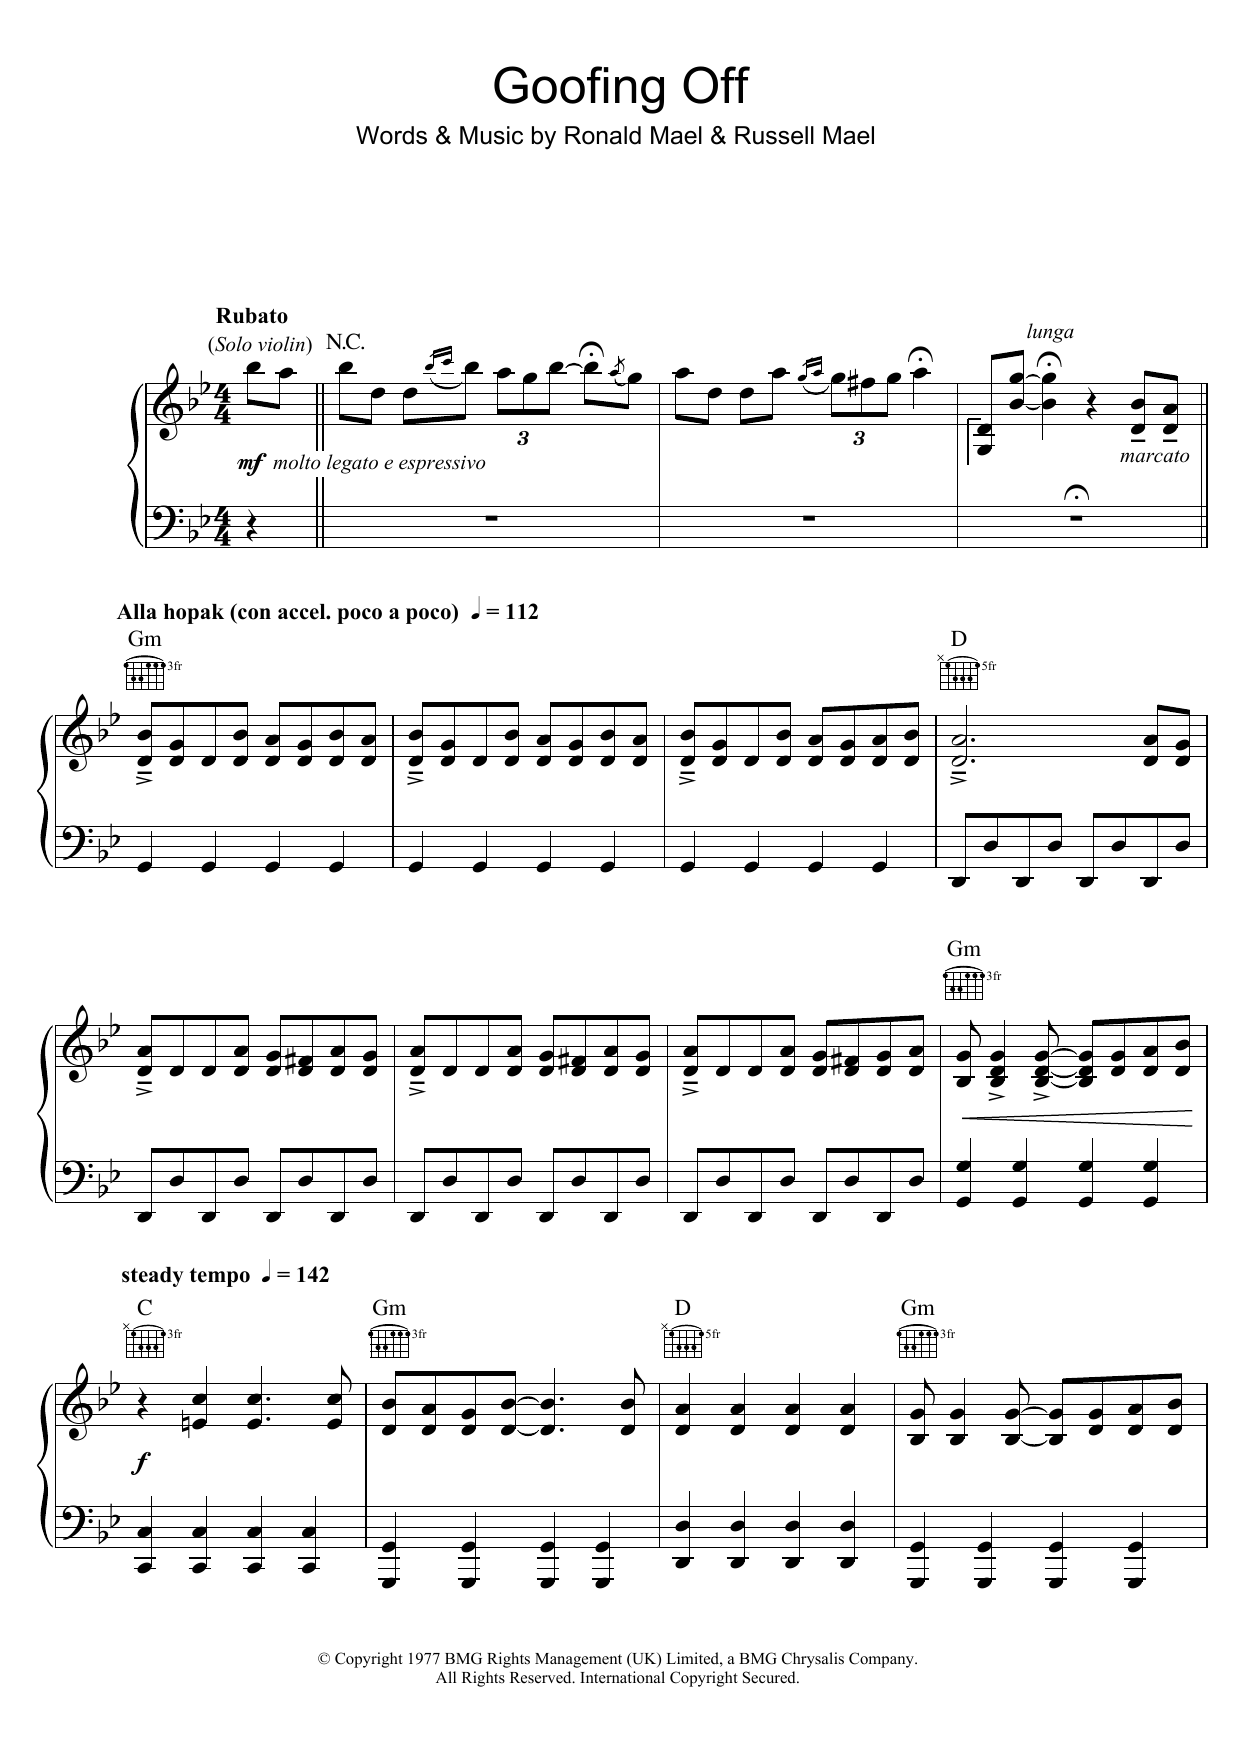 Download Sparks Goofing Off Sheet Music